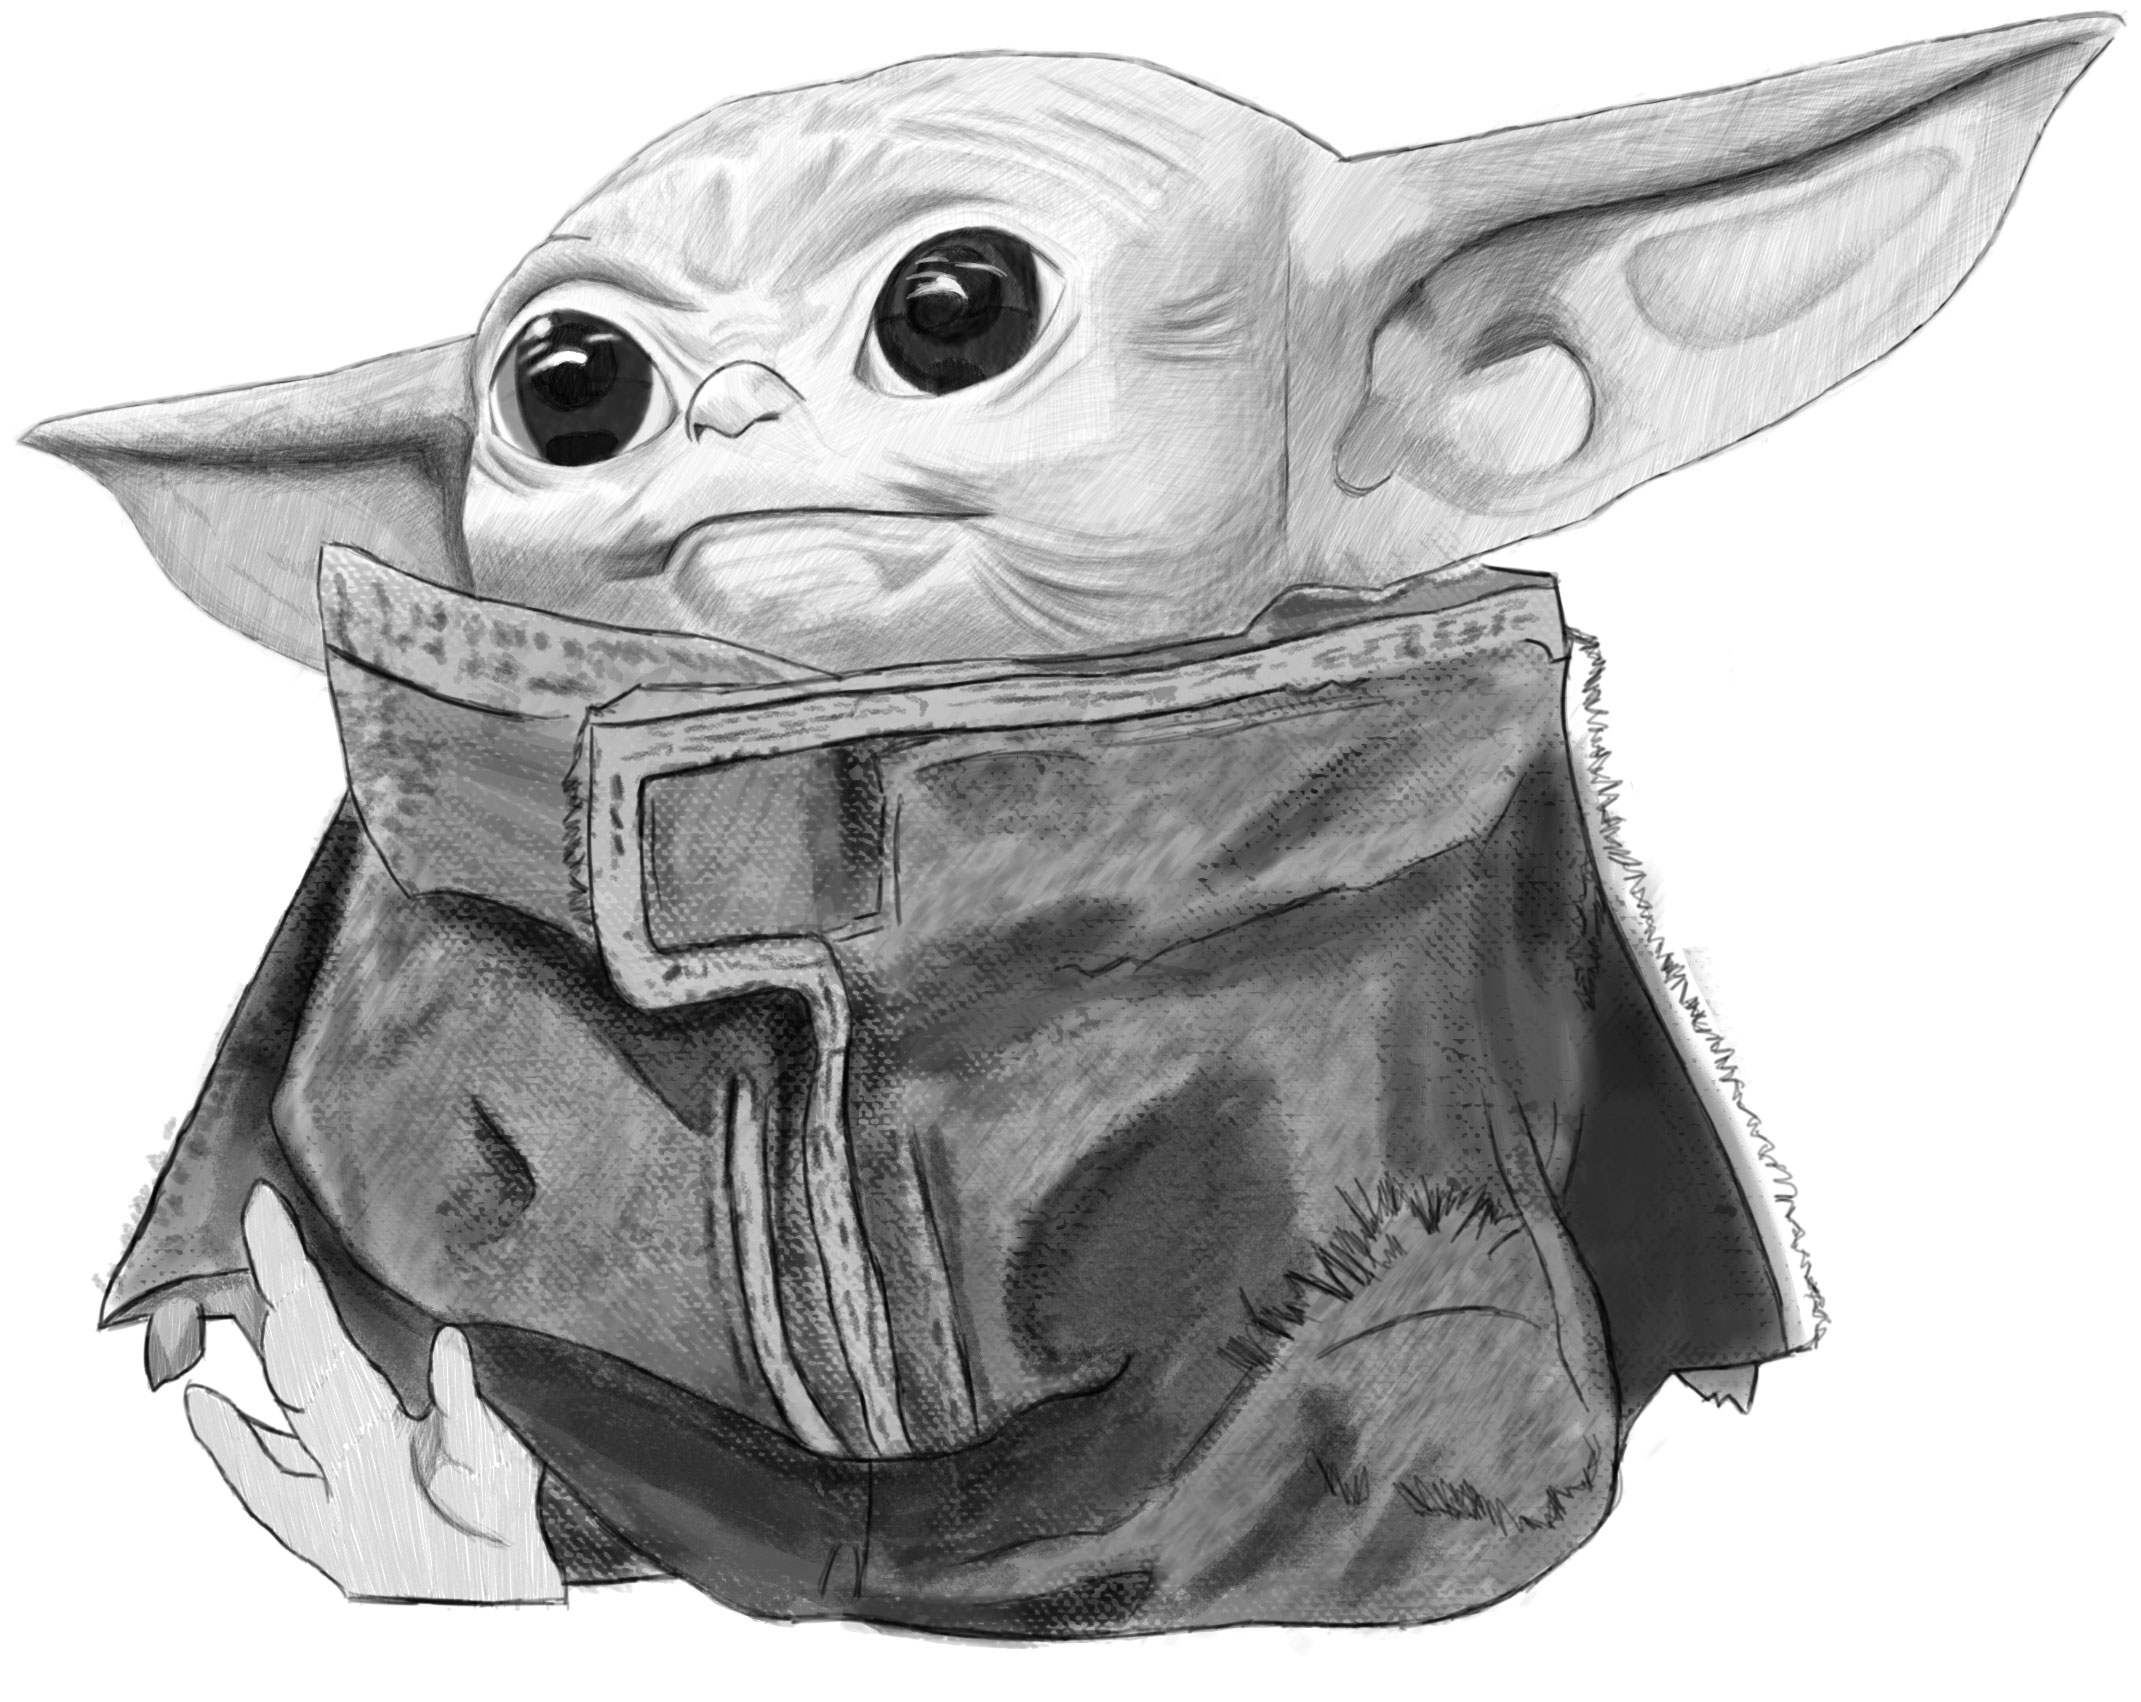 How to draw Grogu (Baby Yoda) in 8 easy steps